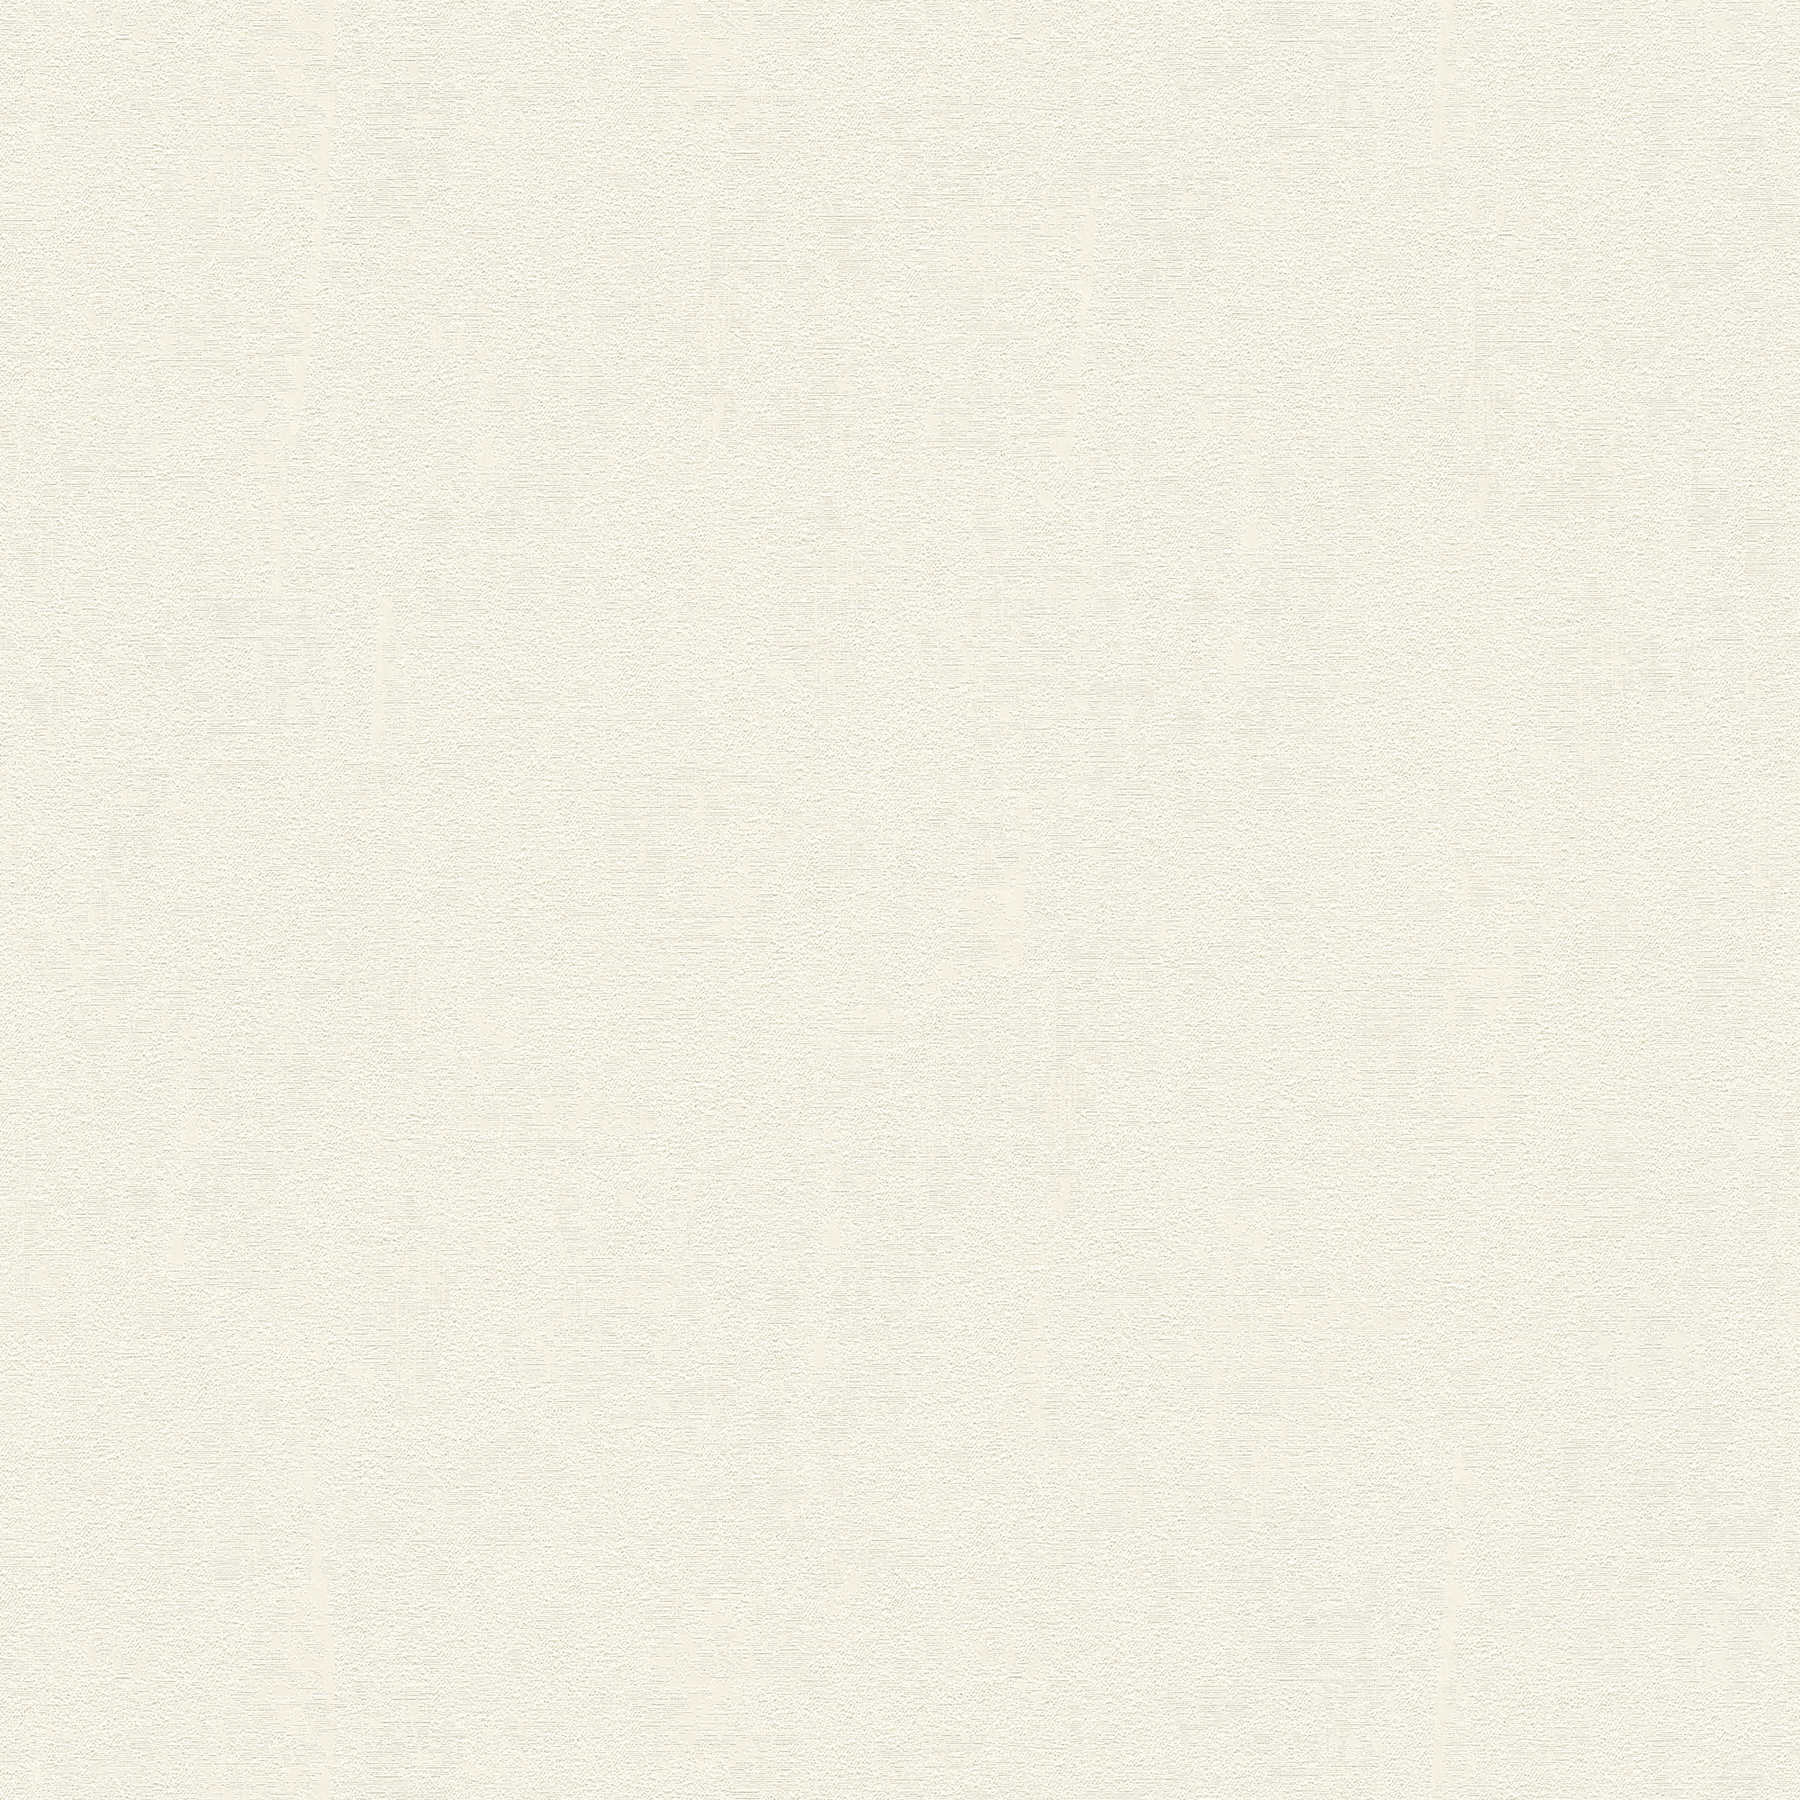 VERSACE Home cream coloured plain wallpaper with attractive shimmer - cream
